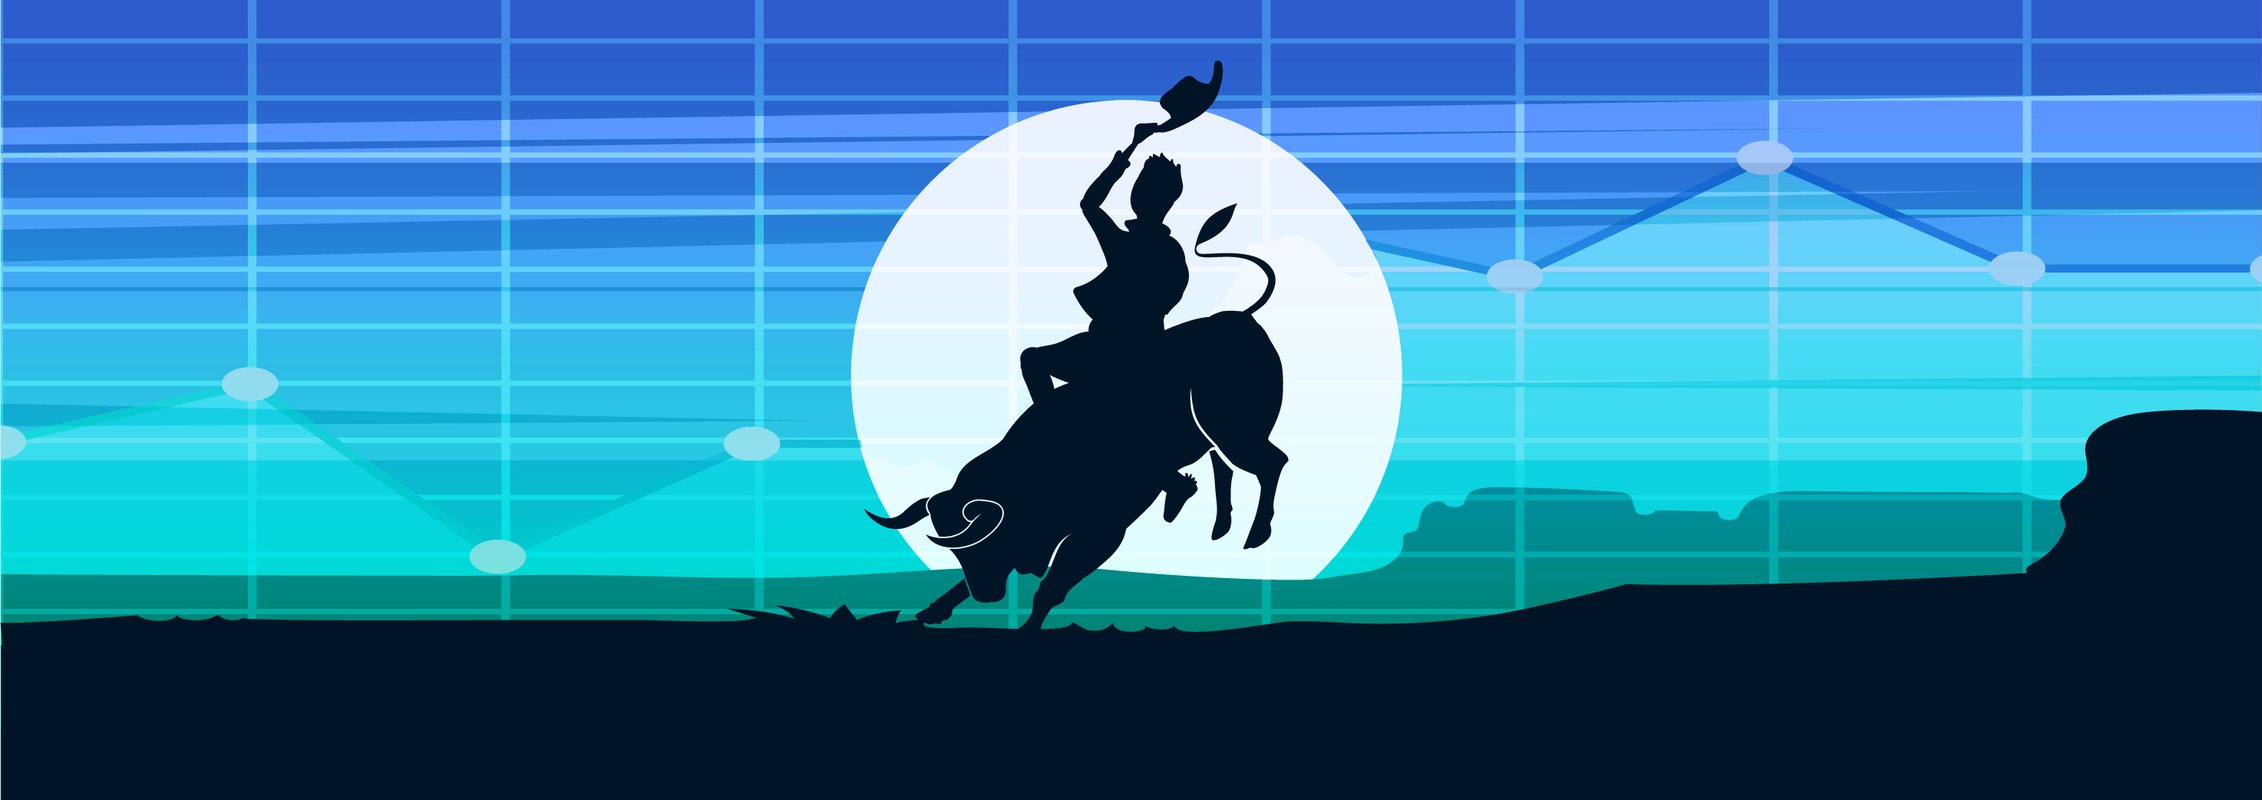 The shadow of a man seated on a bull flying his hat shows in front of a circular moonlight on a blue and purple background.